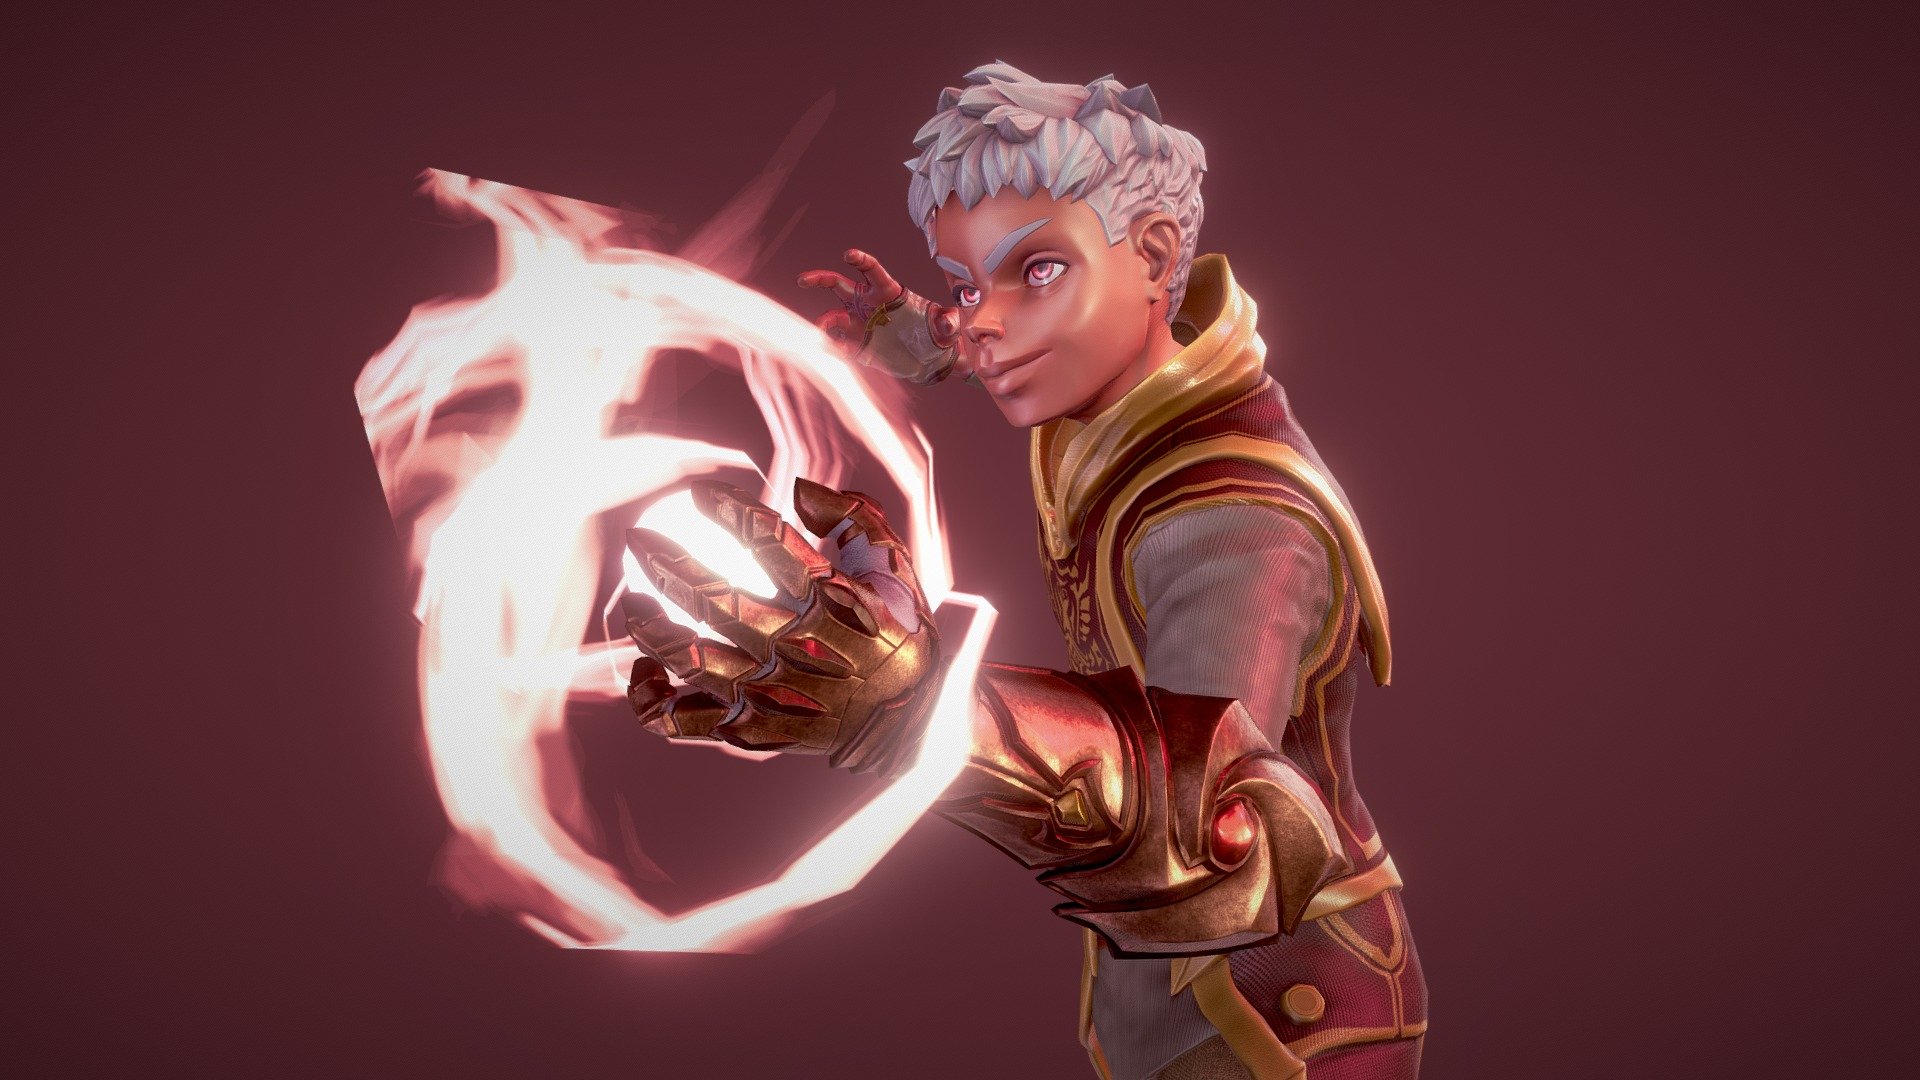 This is an original character created by me for FlippedNormals' Warlock Art Challenge. 

Made in Blender

See it on BlenderArtists: 
 https://blenderartists.org/t/real-time-warlock-character/1230211?u=felgoh - Real-Time Warlock Character - 3D model by Felipe G. (@felgoh) 3d model